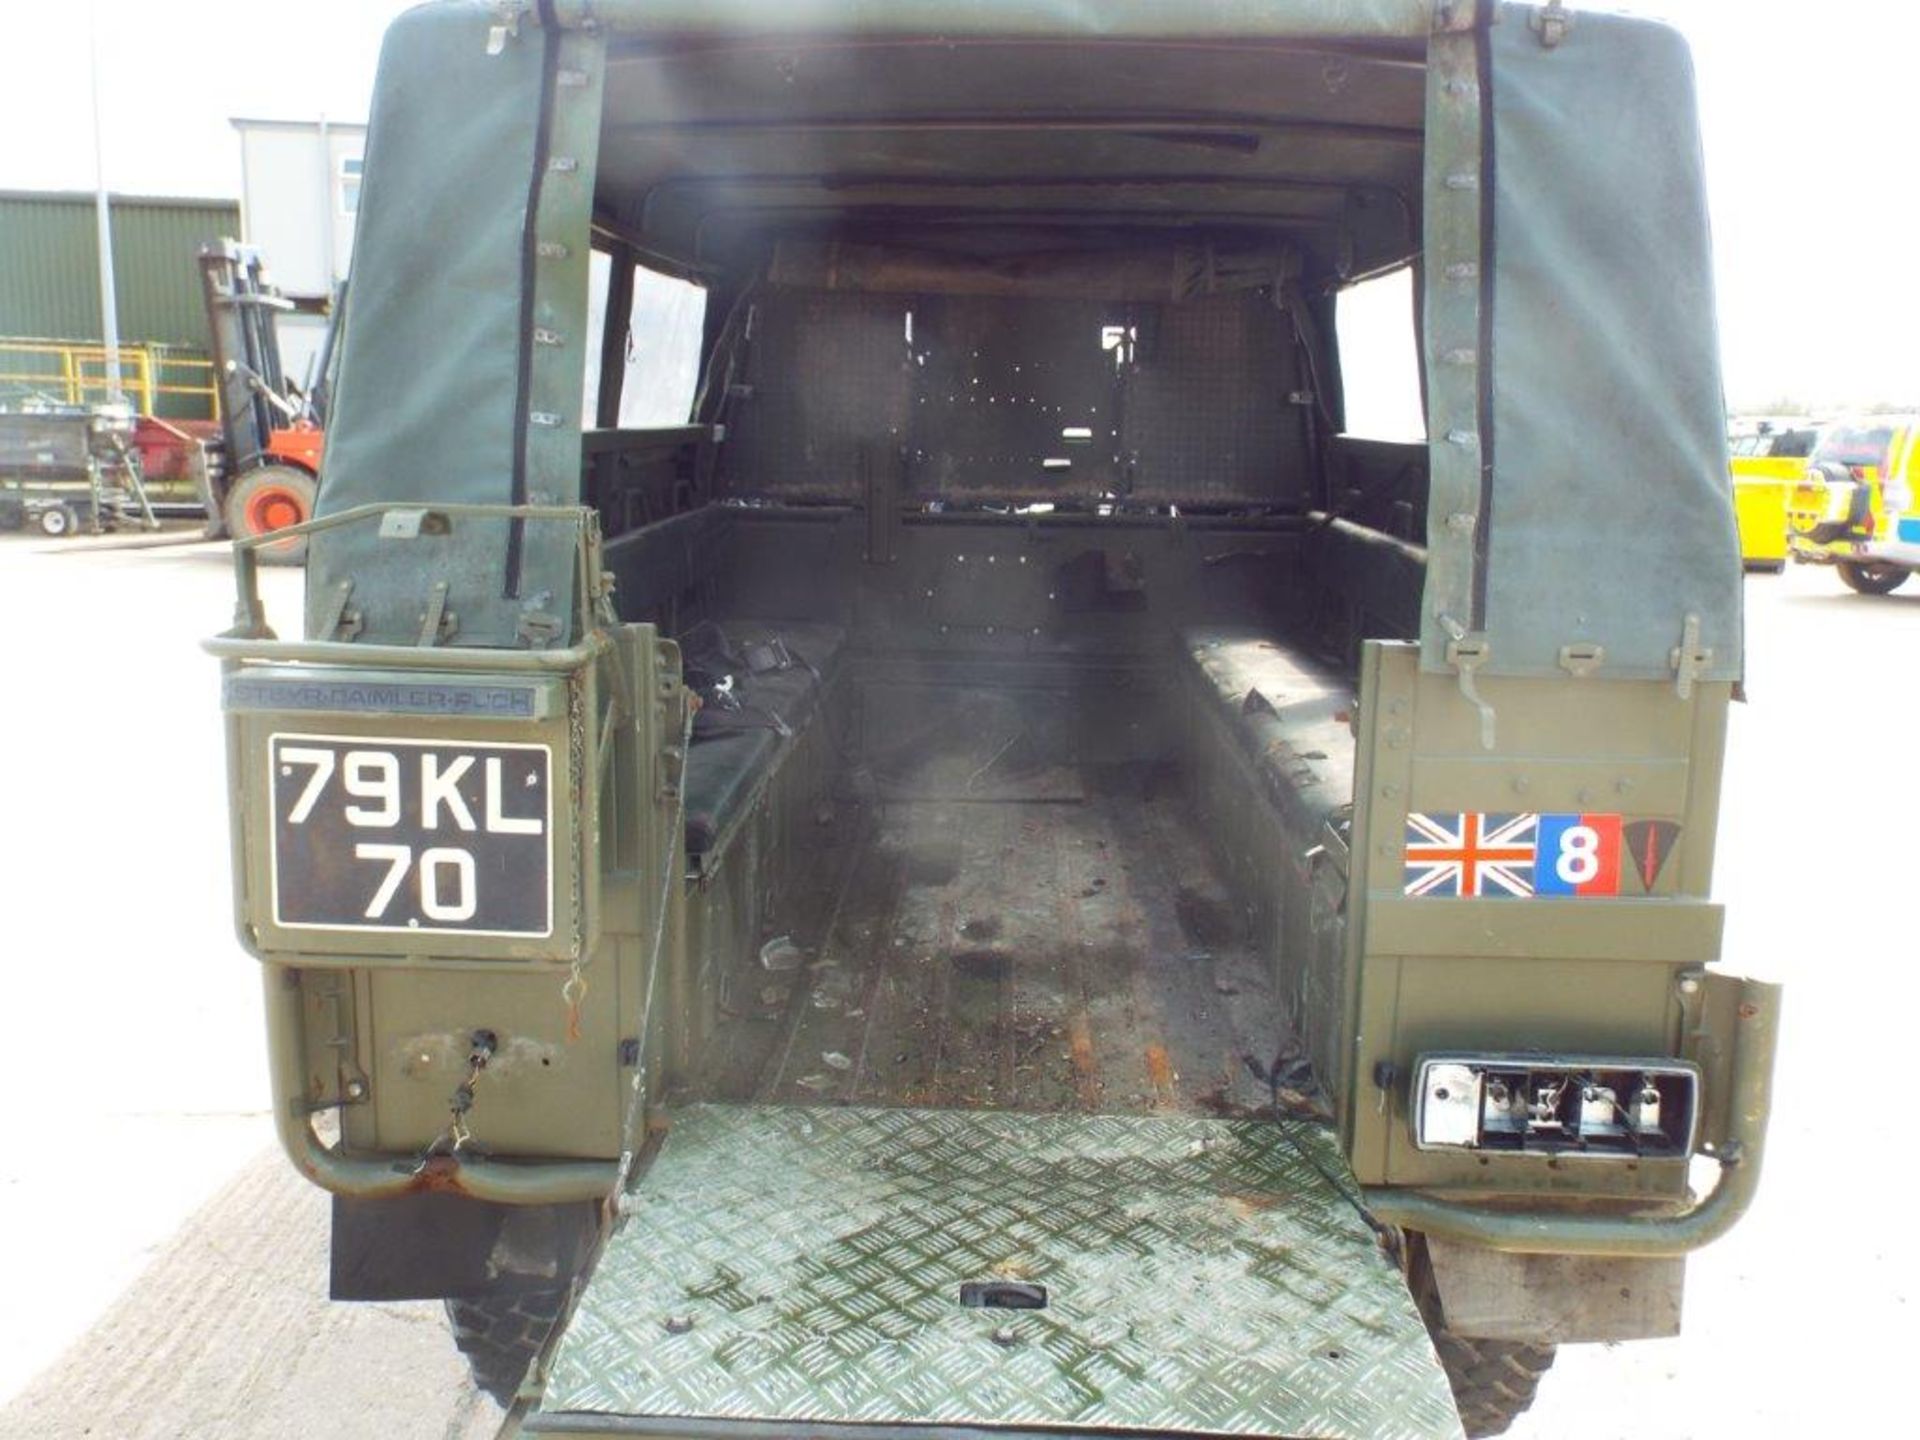 Military Specification Pinzgauer 4X4 Soft Top - Image 22 of 36